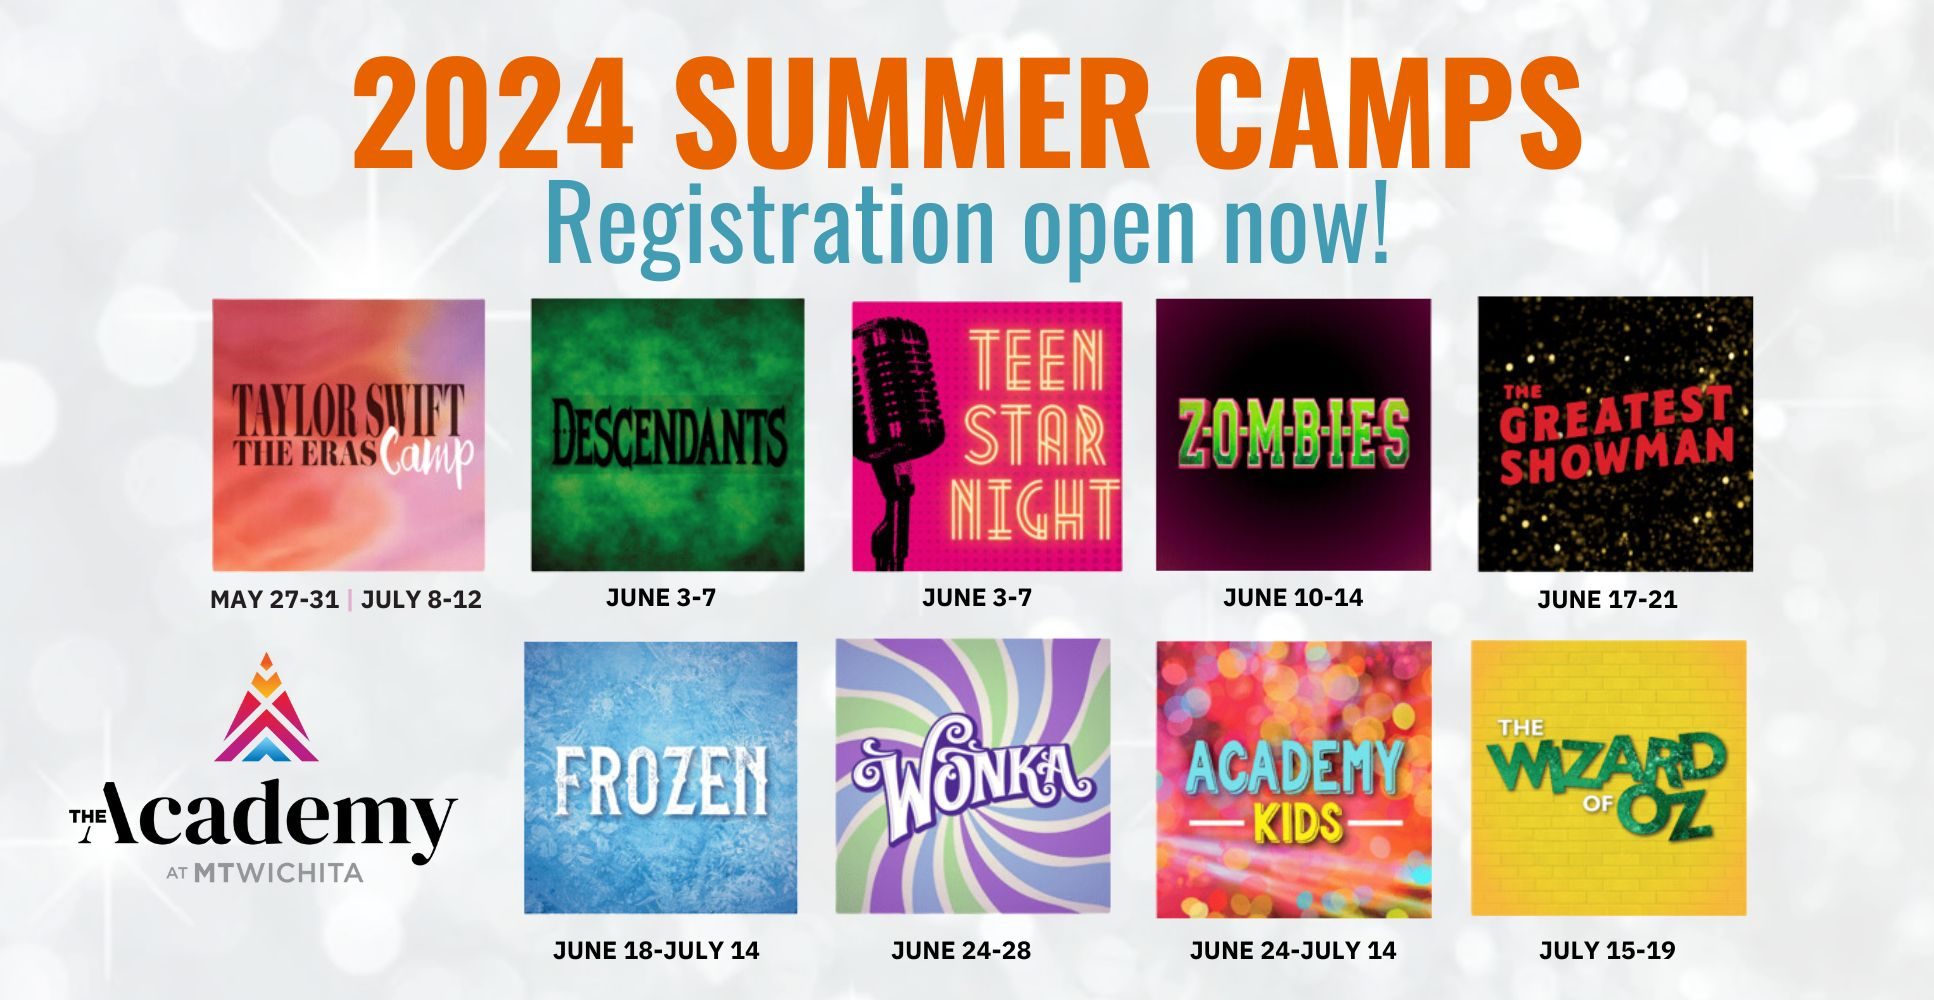 SUMMER CAMPS (Instagram Post) (1934 x 1000 px)